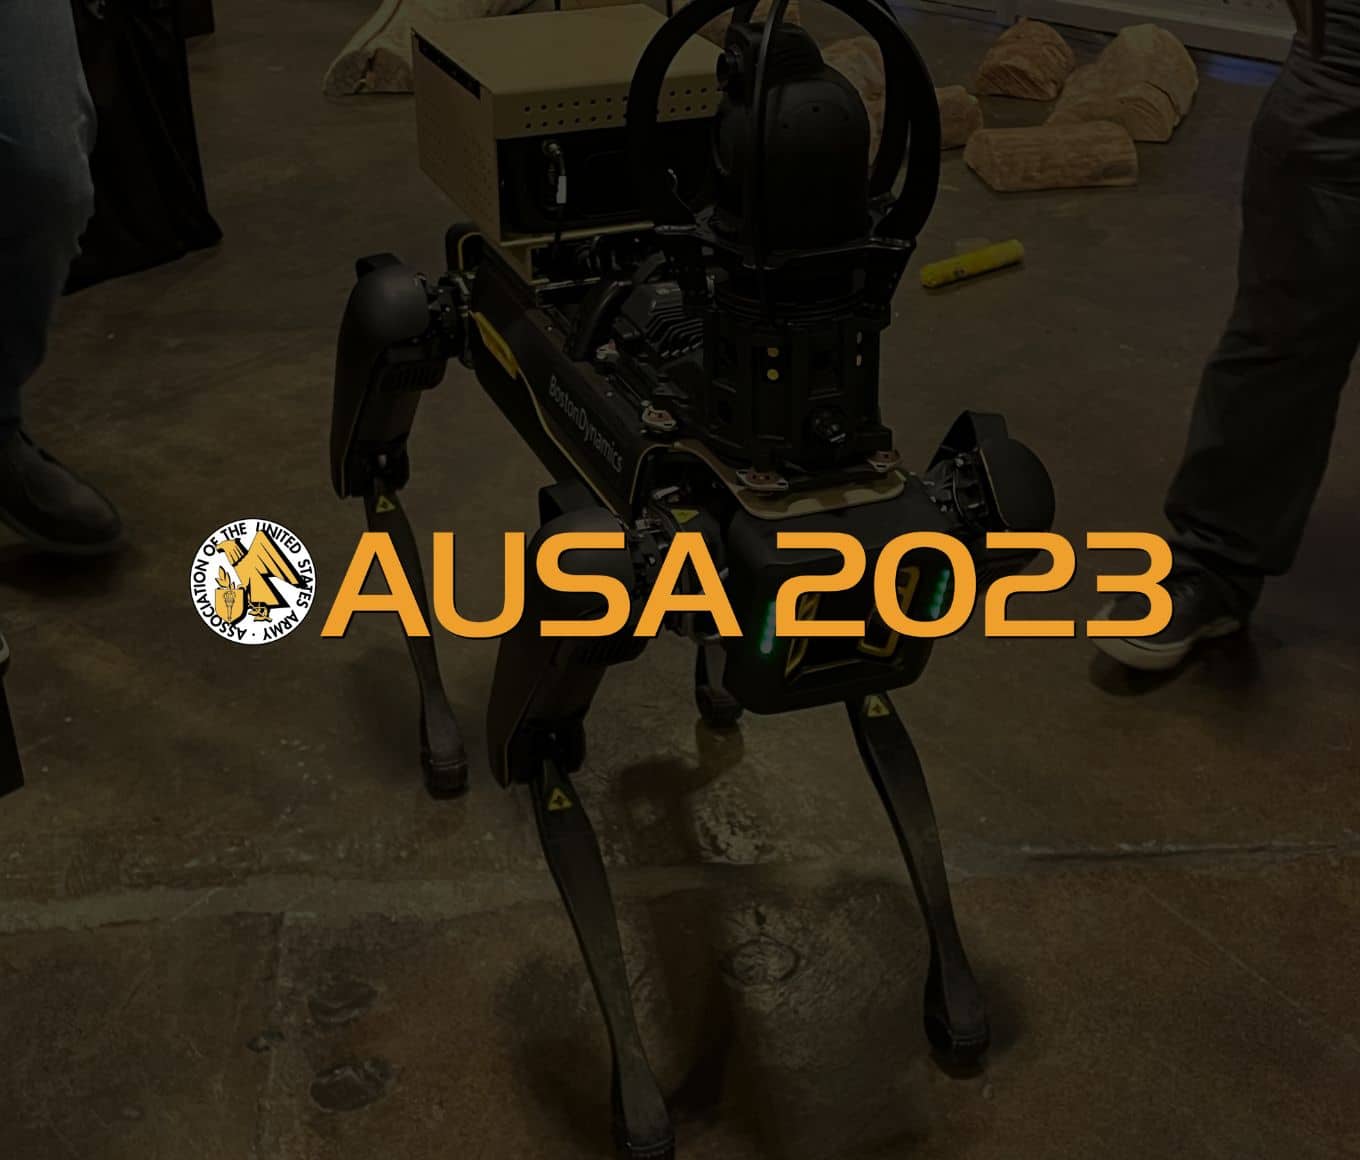 a dark-colored Spot in a trade show booth with the AUSA 2023 logo overlaid